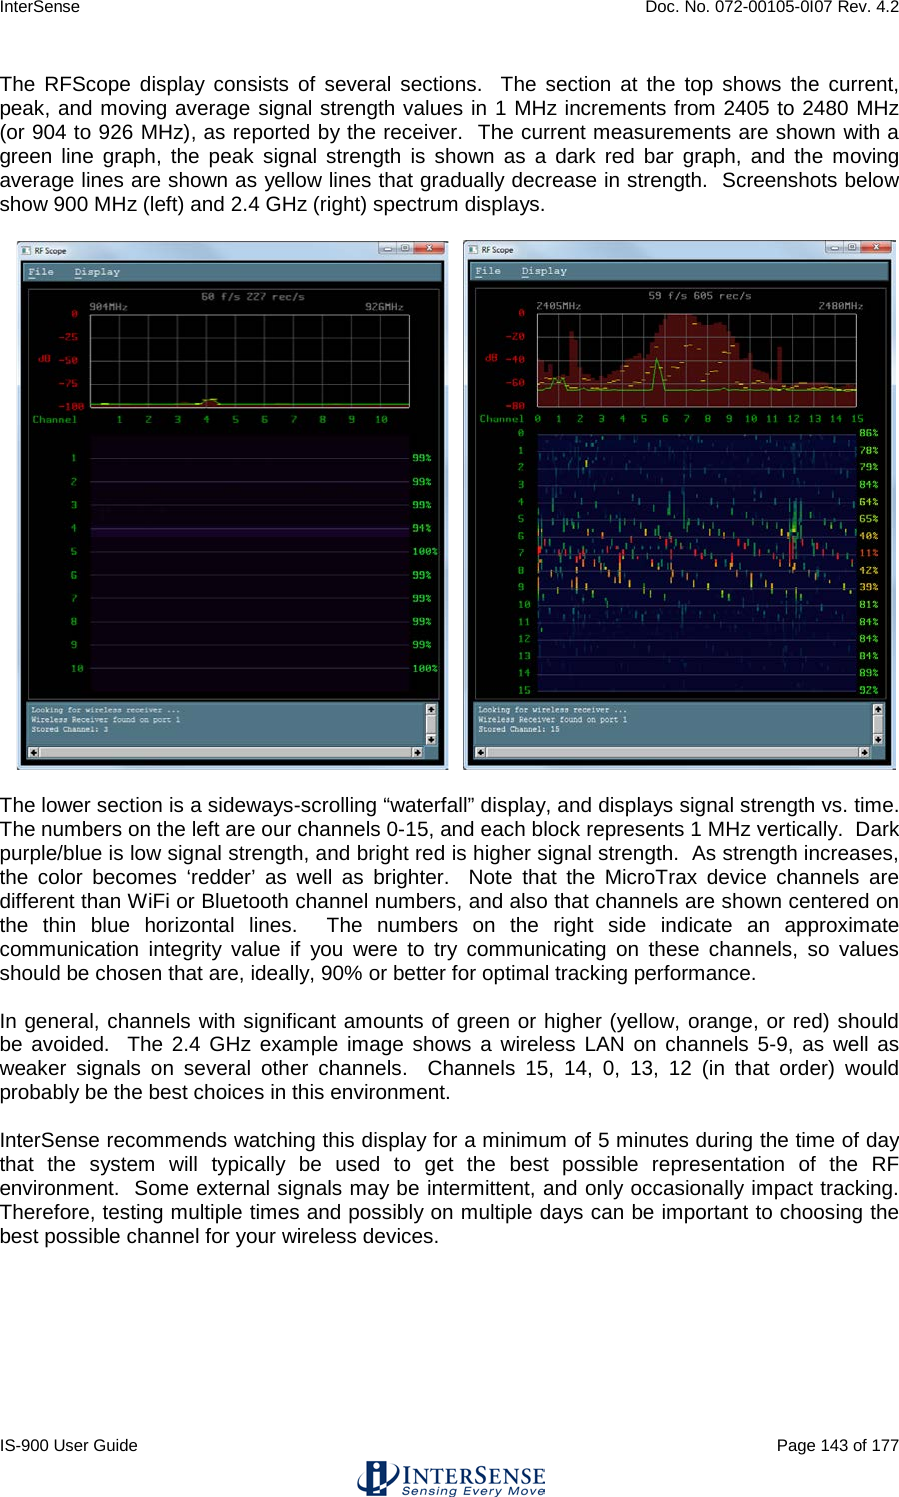 InterSense    Doc. No. 072-00105-0I07 Rev. 4.2 IS-900 User Guide                                                                                                                                          Page 143 of 177  The RFScope display consists of several sections.  The section at the top shows the current, peak, and moving average signal strength values in 1 MHz increments from 2405 to 2480 MHz (or 904 to 926 MHz), as reported by the receiver.  The current measurements are shown with a green line graph, the peak signal strength is shown as a dark red bar graph, and the moving average lines are shown as yellow lines that gradually decrease in strength.  Screenshots below show 900 MHz (left) and 2.4 GHz (right) spectrum displays.             The lower section is a sideways-scrolling “waterfall” display, and displays signal strength vs. time.  The numbers on the left are our channels 0-15, and each block represents 1 MHz vertically.  Dark purple/blue is low signal strength, and bright red is higher signal strength.  As strength increases, the color becomes ‘redder’ as well as brighter.  Note that the MicroTrax device channels are different than WiFi or Bluetooth channel numbers, and also that channels are shown centered on the thin blue horizontal lines.  The numbers on the right side indicate an approximate communication integrity value if you were to try communicating on these channels, so values should be chosen that are, ideally, 90% or better for optimal tracking performance.  In general, channels with significant amounts of green or higher (yellow, orange, or red) should be avoided.  The 2.4 GHz example image shows a wireless LAN on channels 5-9, as well as weaker signals on several other channels.  Channels 15, 14, 0, 13, 12 (in that order) would probably be the best choices in this environment.   InterSense recommends watching this display for a minimum of 5 minutes during the time of day that the system will typically be used to get the best possible representation of the RF environment.  Some external signals may be intermittent, and only occasionally impact tracking. Therefore, testing multiple times and possibly on multiple days can be important to choosing the best possible channel for your wireless devices.    